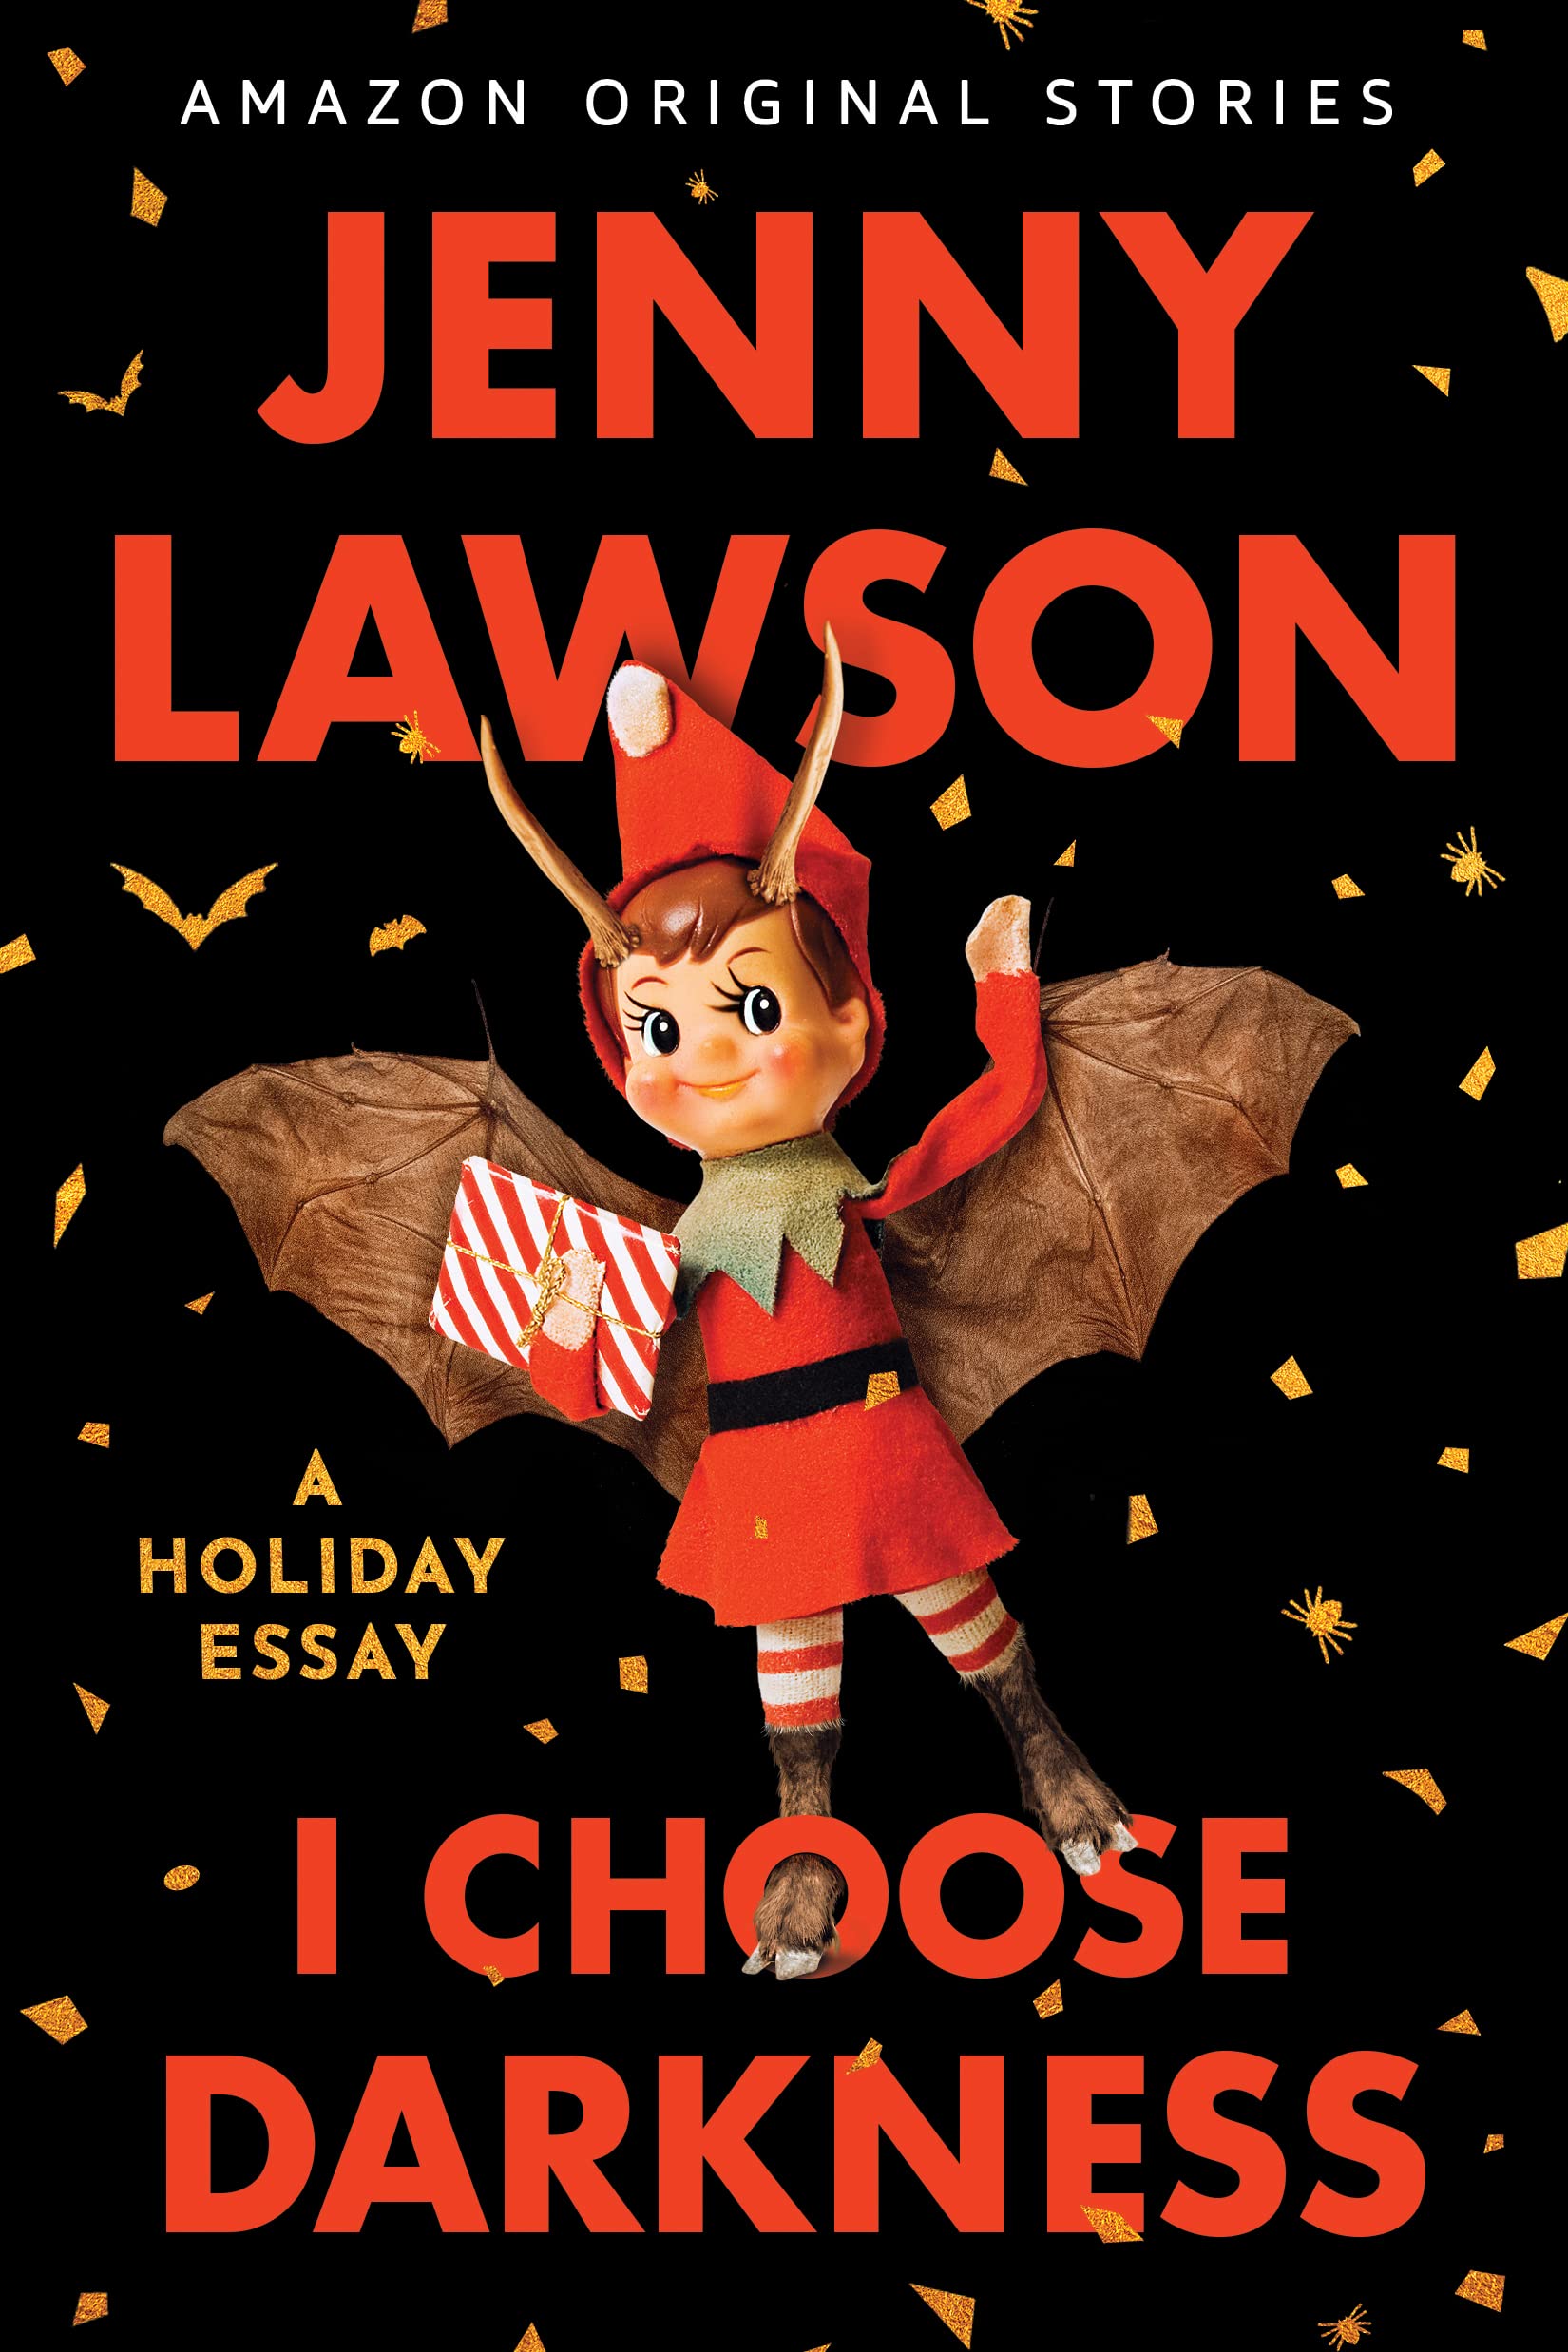 I Choose Darkness: A Holiday Essay Kindle Edition by Jenny Lawson $0.99